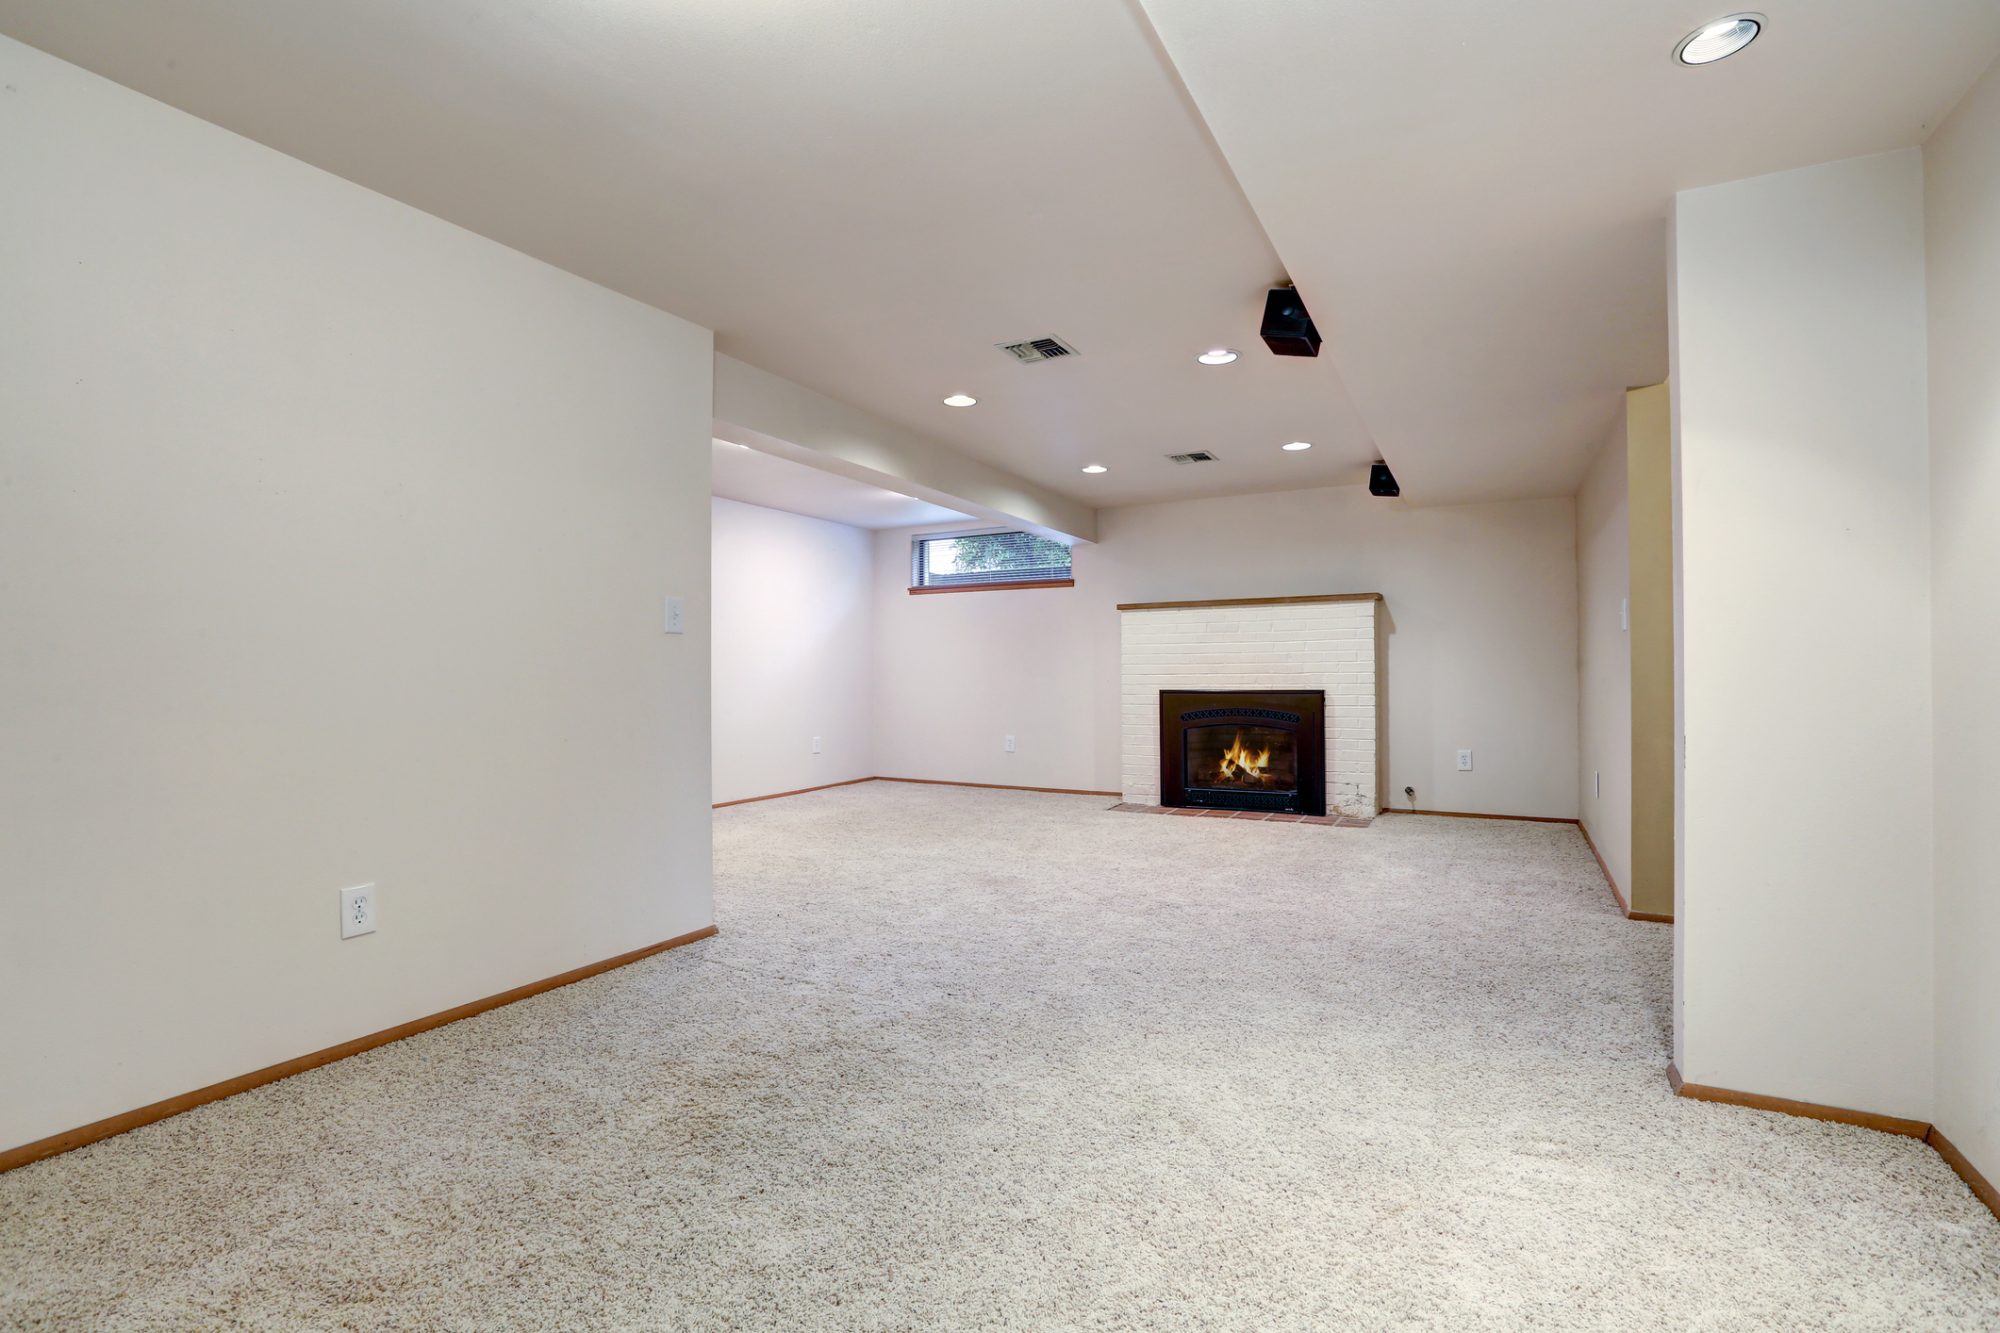 White empty basement room with fireplace and wall to wall carpet floor. Northwest, USA